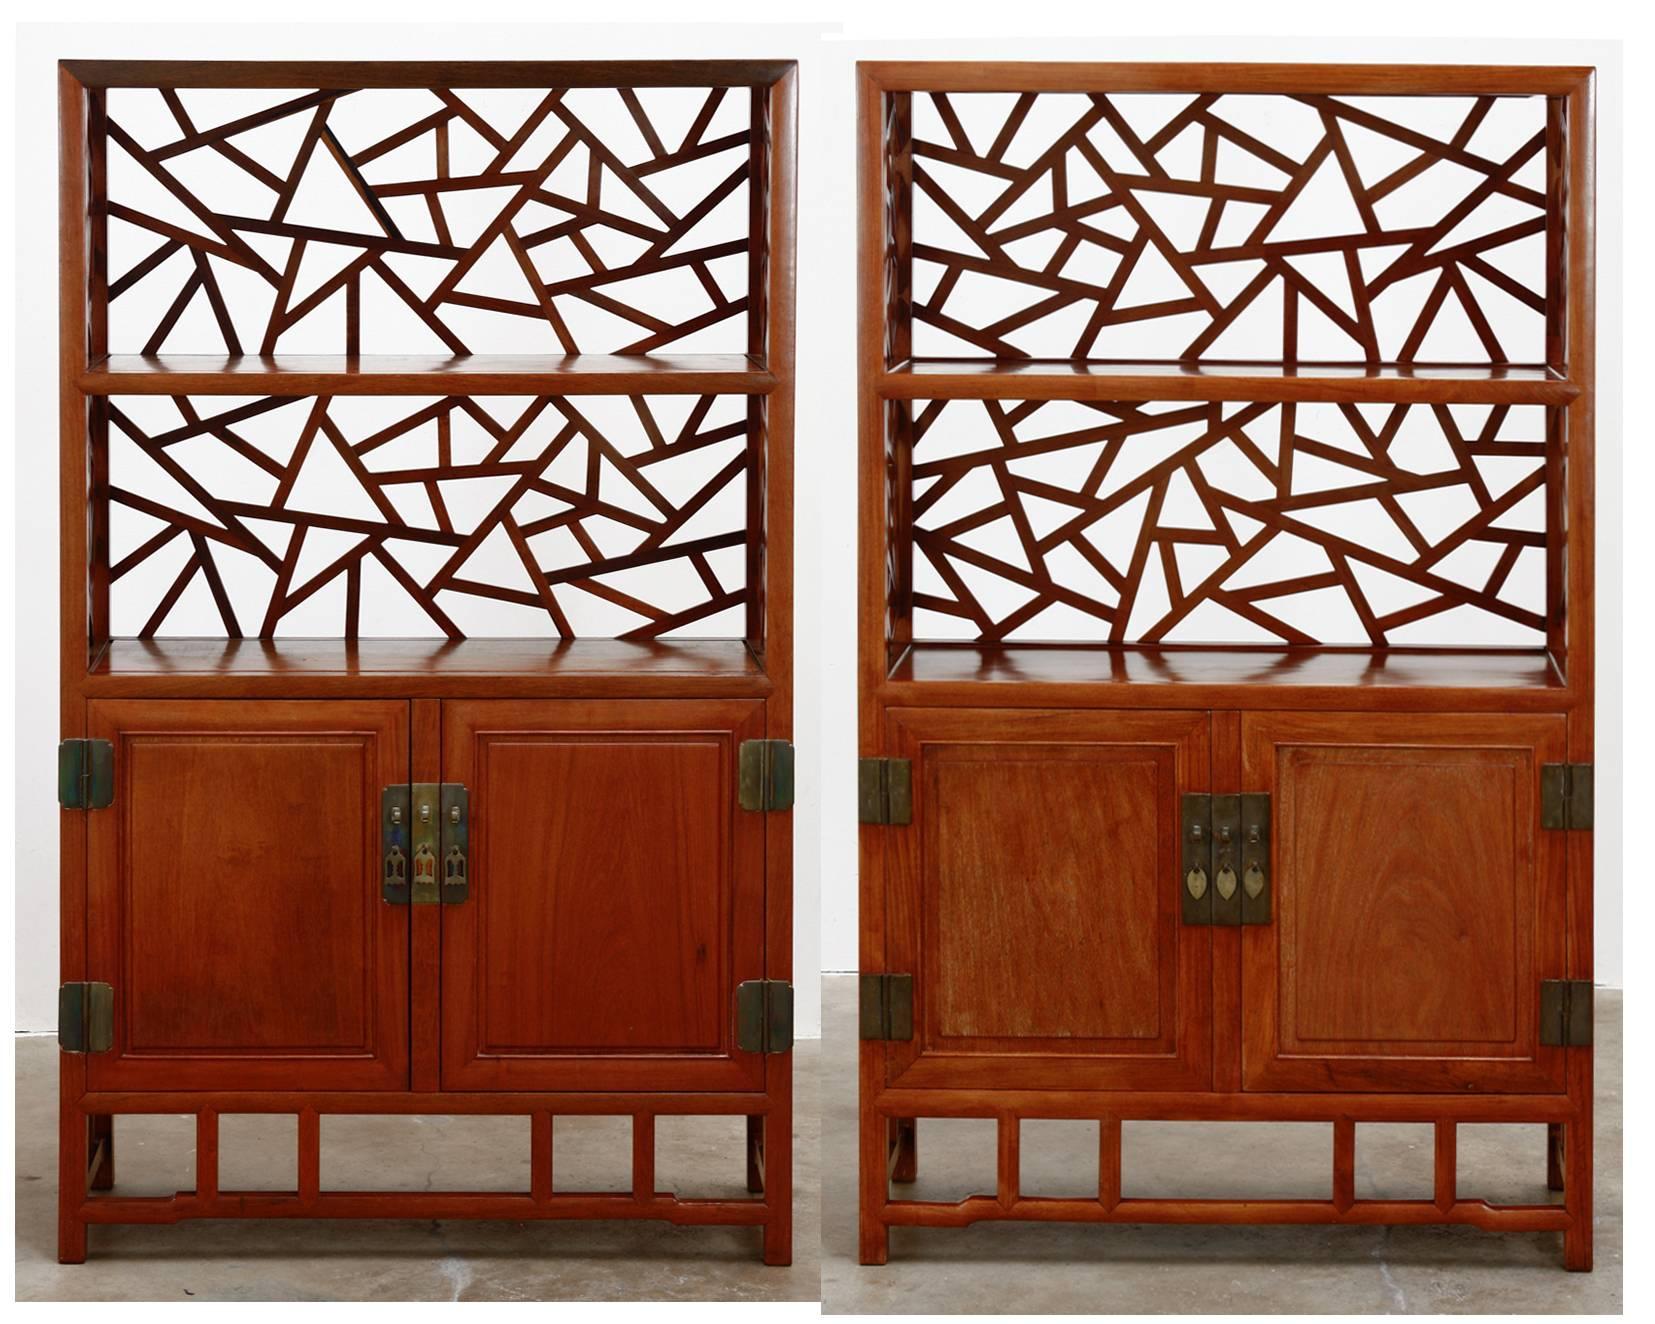 Fantastic pair of Chinese carved rosewood display curio cabinets or bookcases. Featuring a lattice open fretwork design of cracked ice. Intricately carved on three sides having two open shelves on top and two shelves inside the storage area. Solid